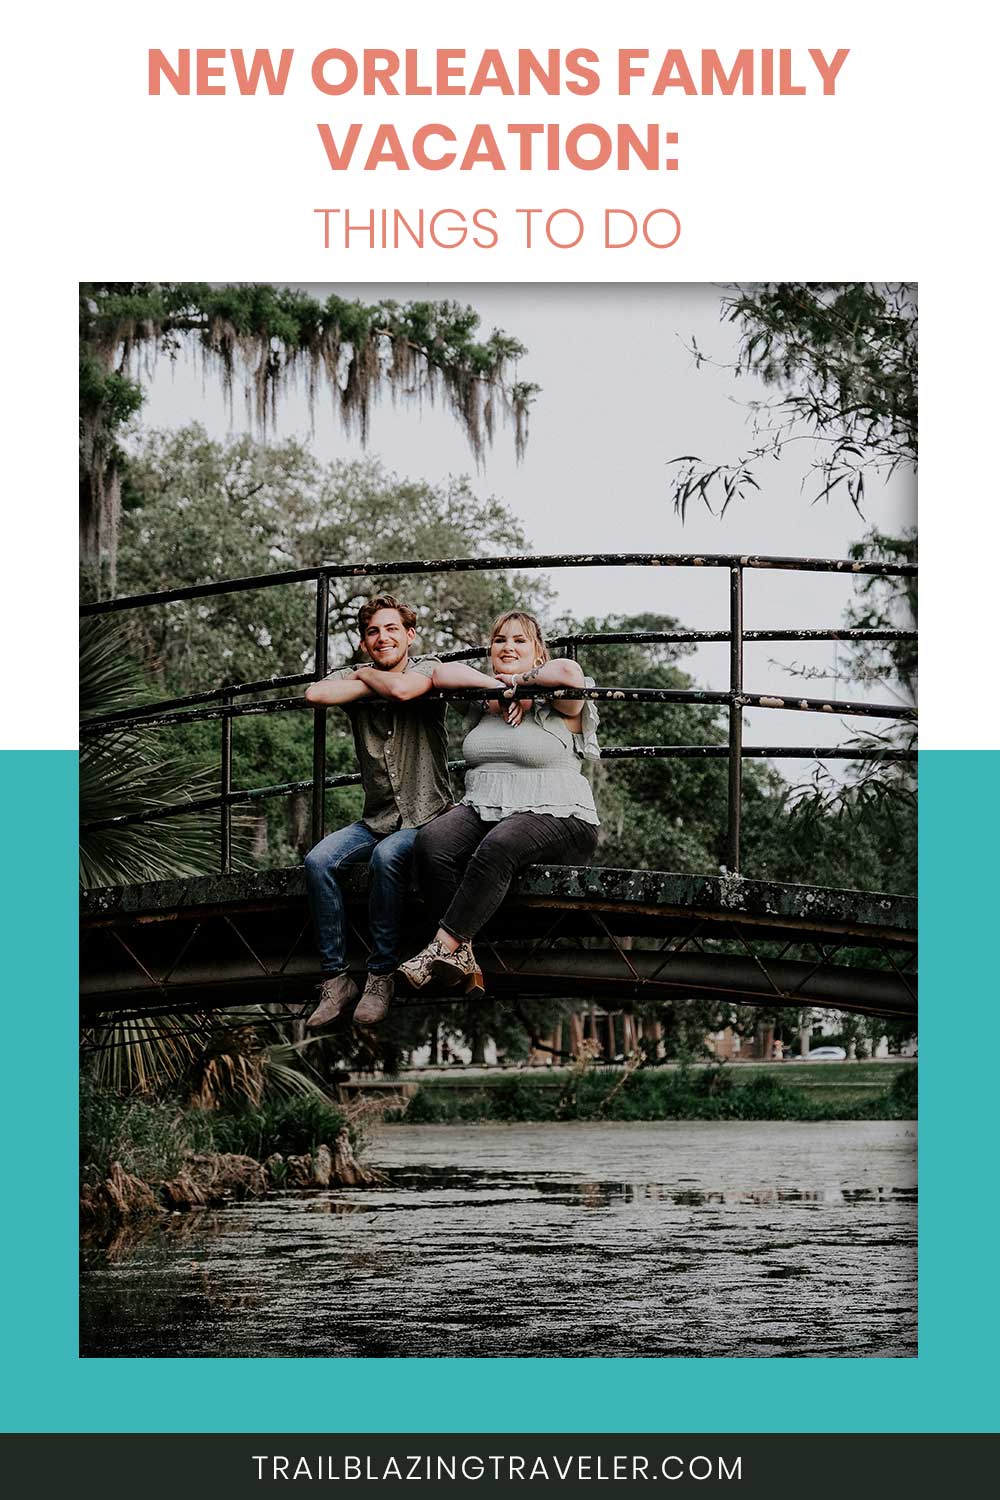 Couple sitting on a small bridge - New Orleans Family Vacation: Things to Do.